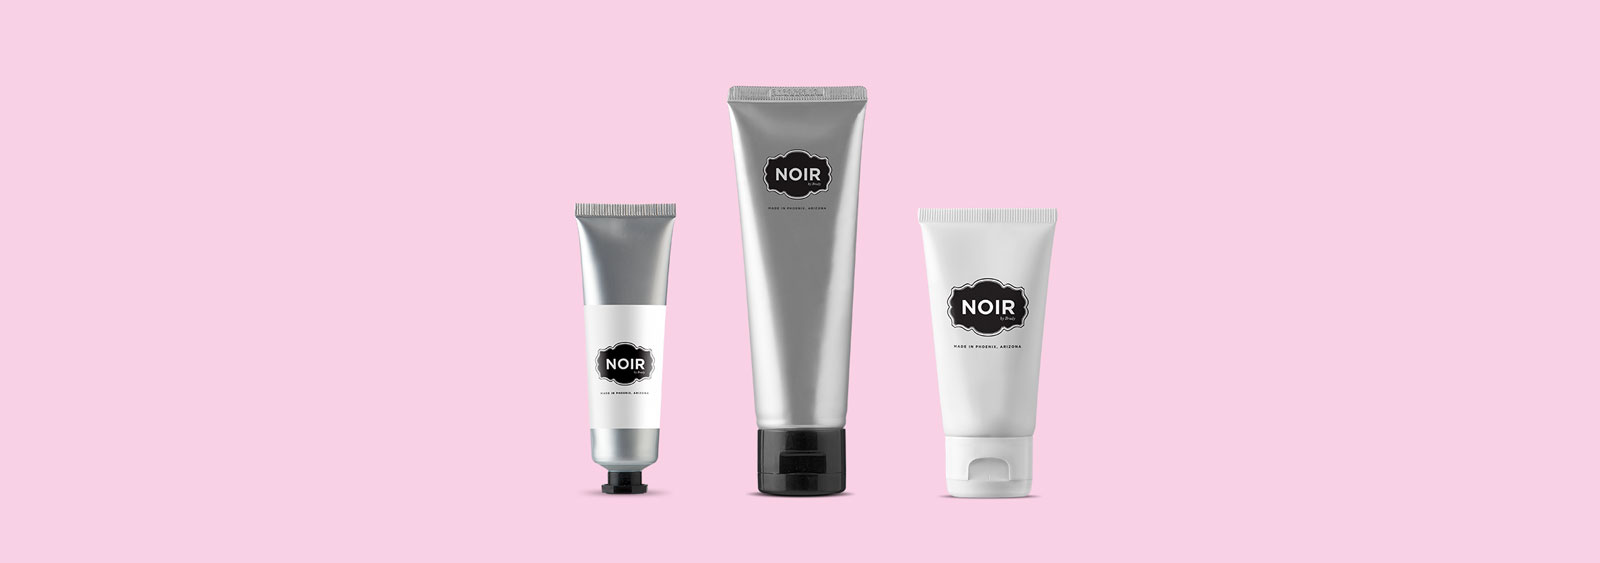 Brand and identity design for Noir by Brady, by Noisy Ghost Co.